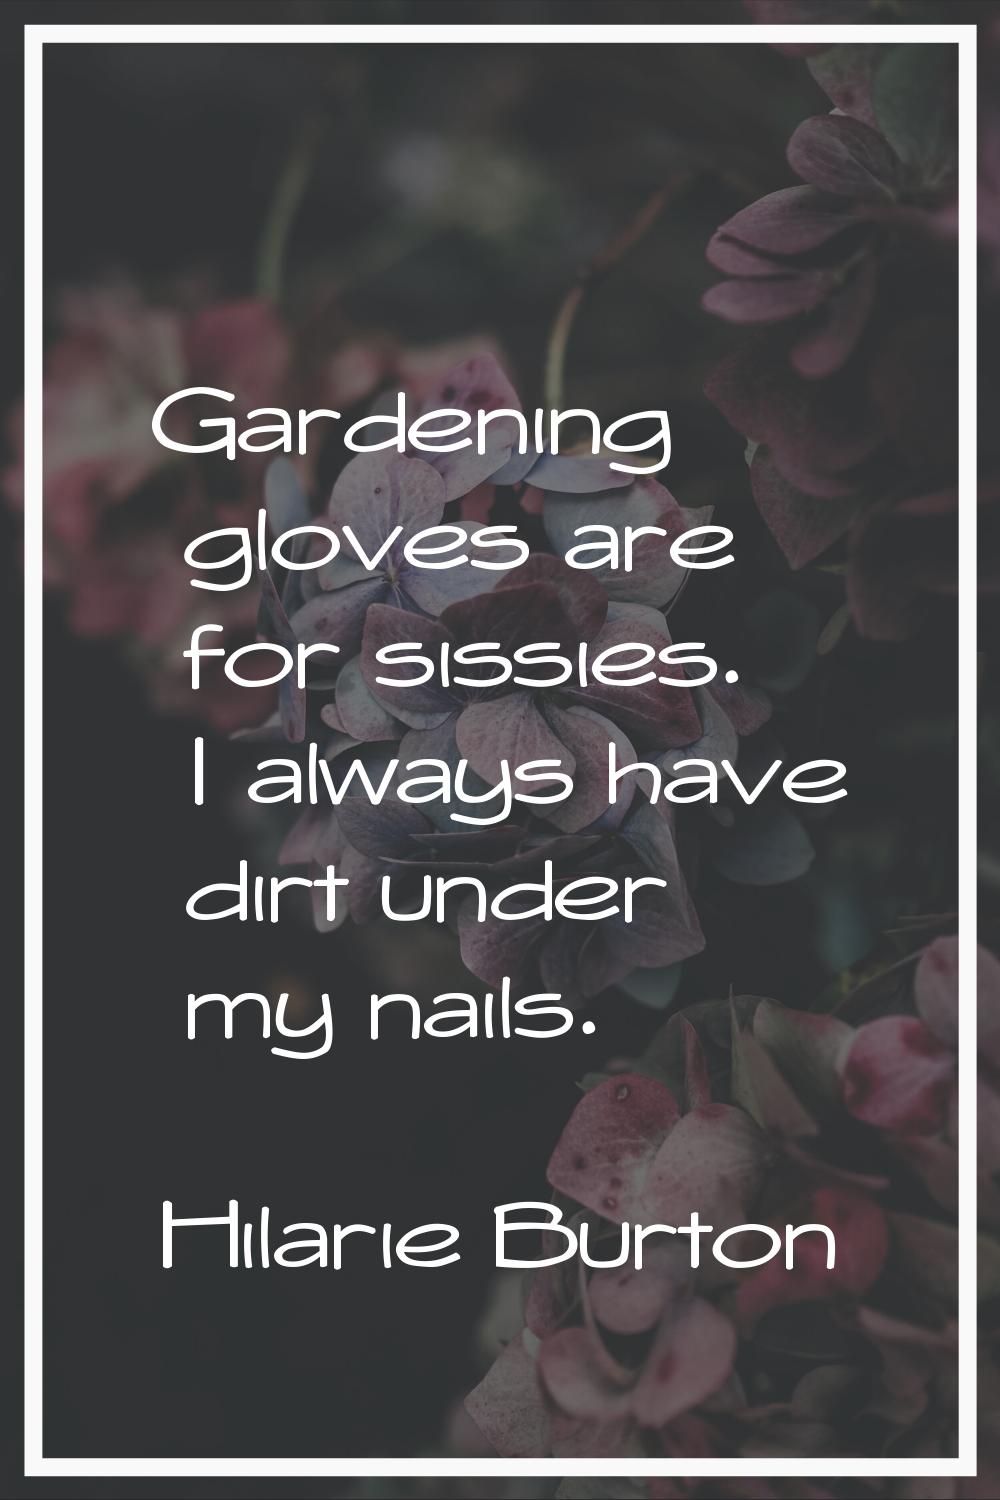 Gardening gloves are for sissies. I always have dirt under my nails.